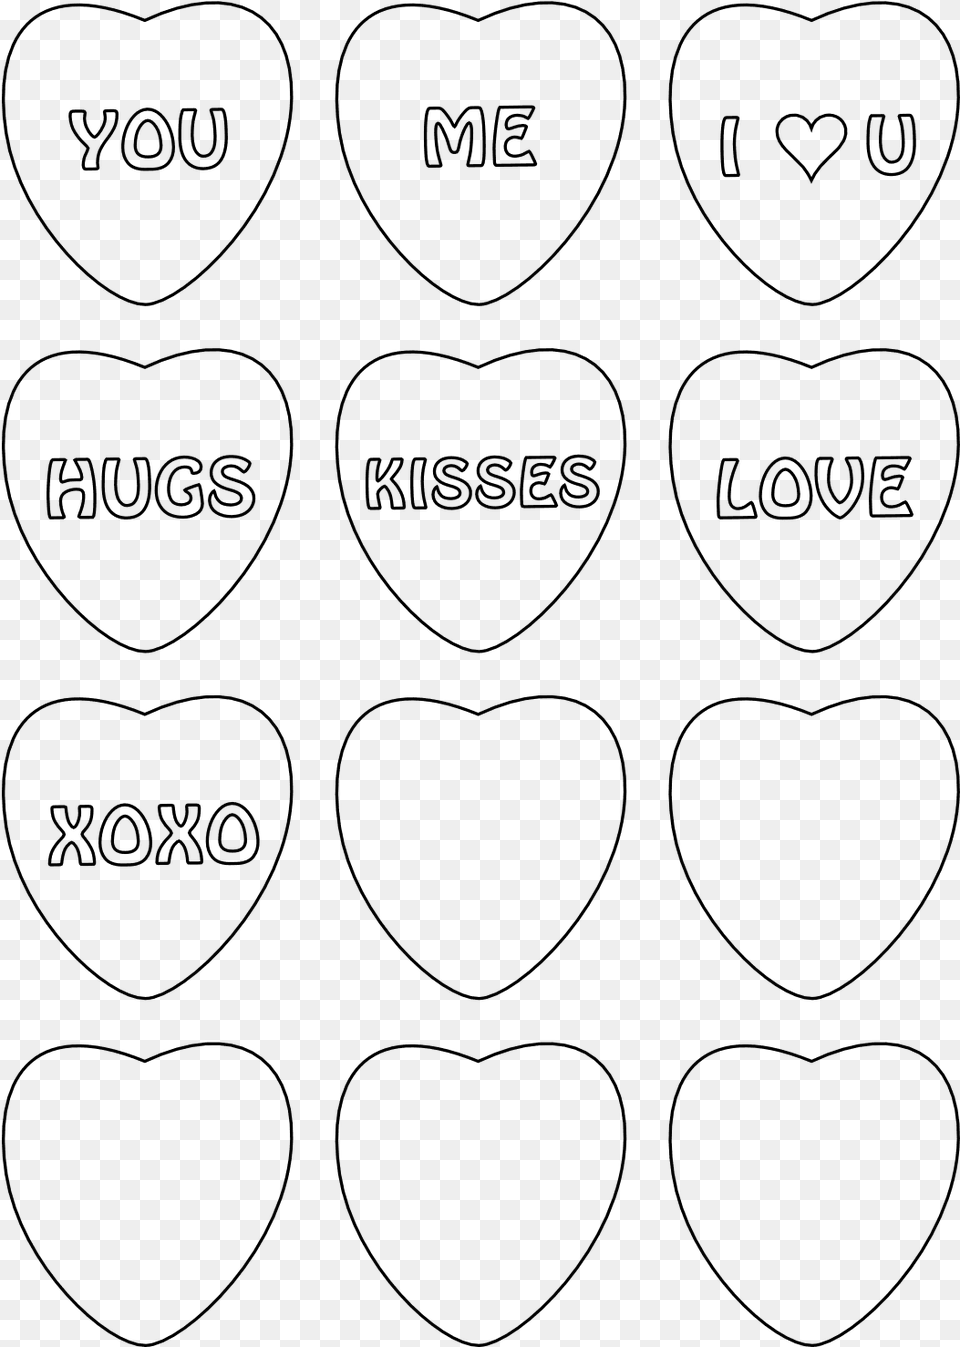 Candy Heart Coloring Sheets With 6 Printable Heart Love Heart Sweet, Gray Free Transparent Png